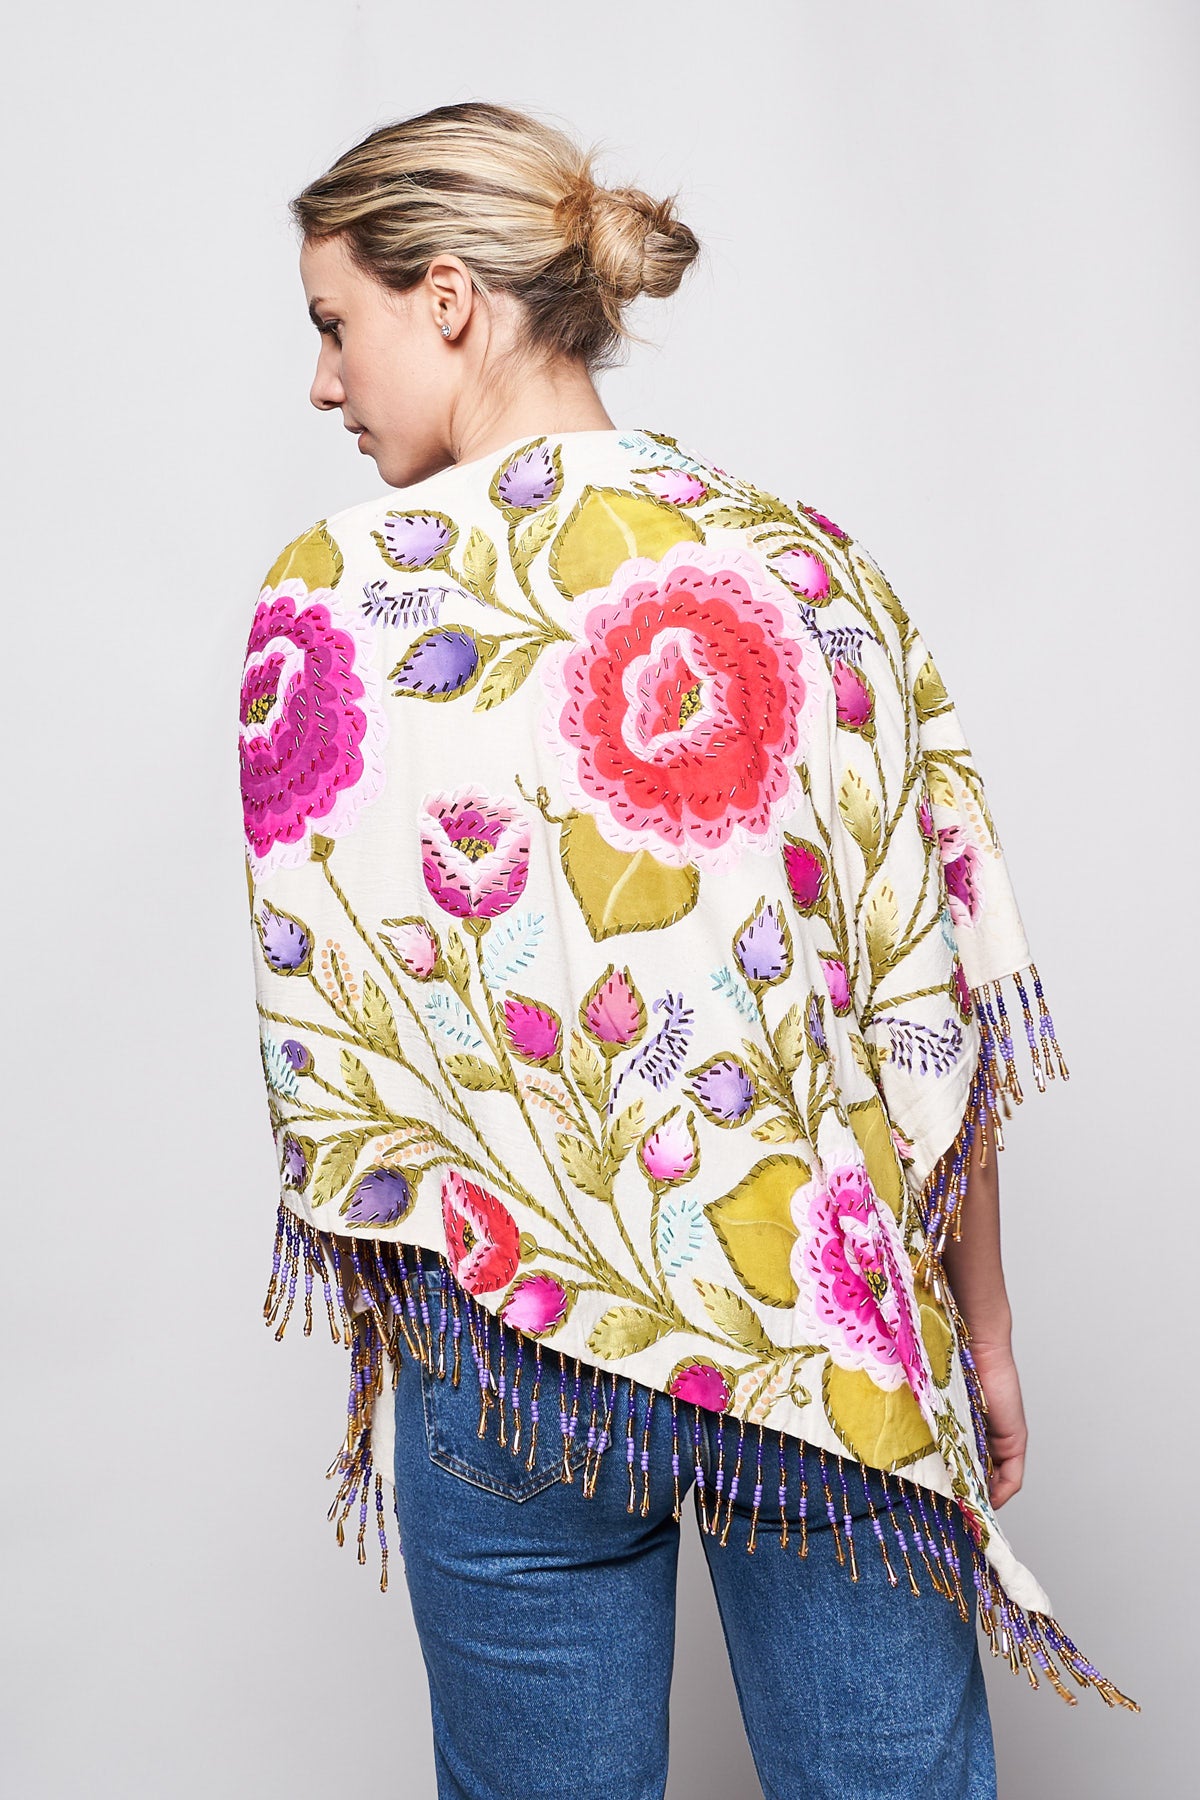 HAND-PAINTED AND HAND-EMBROIDERED TRIANGULAR SHAWL WITH BEADED FRINGE - TEXTIL FLORES